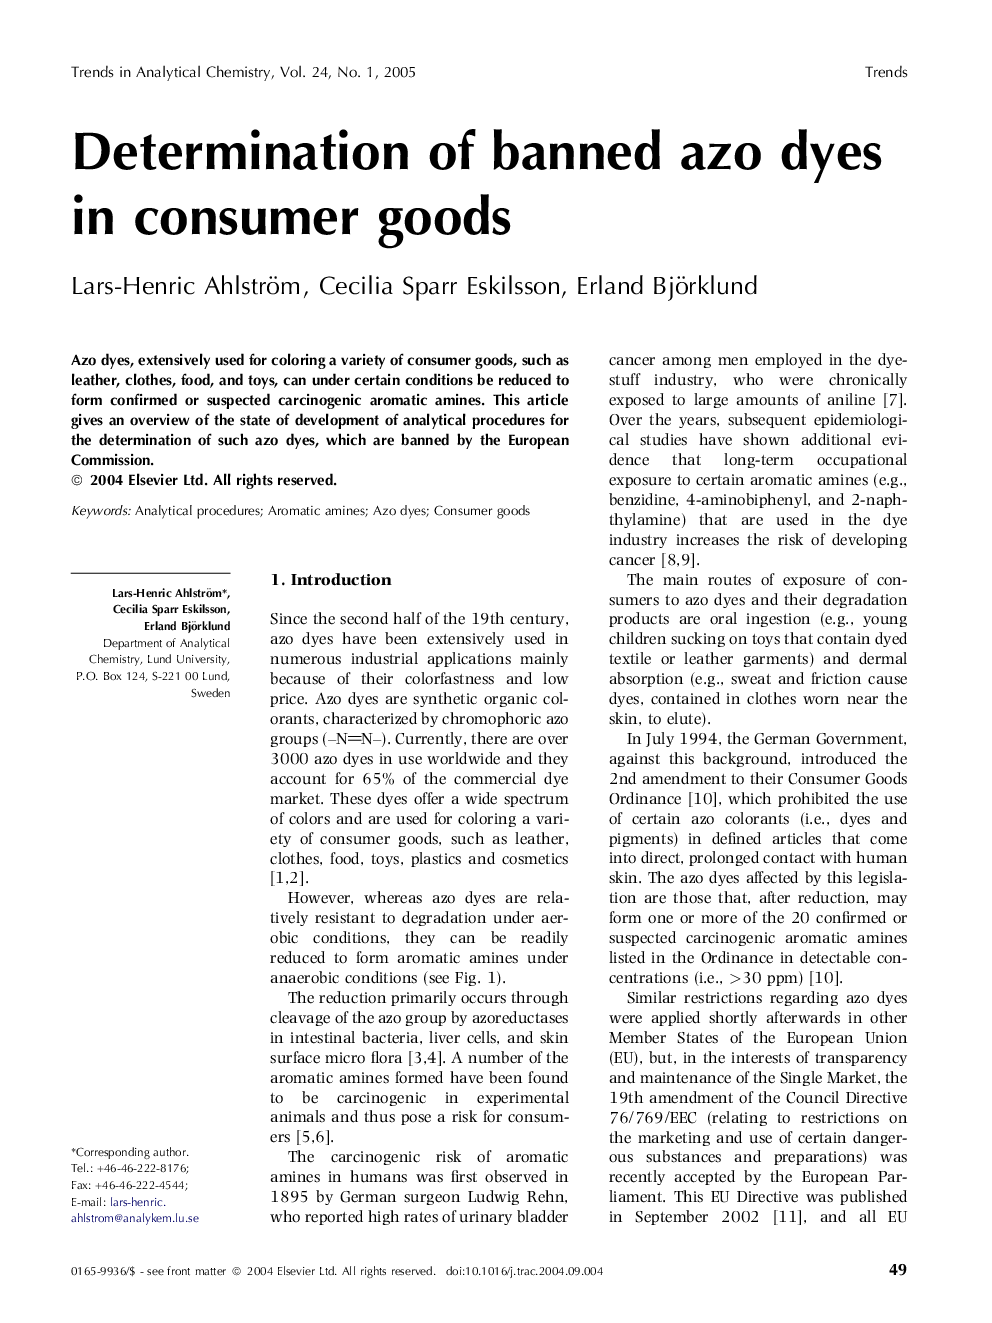 Determination of banned azo dyes in consumer goods